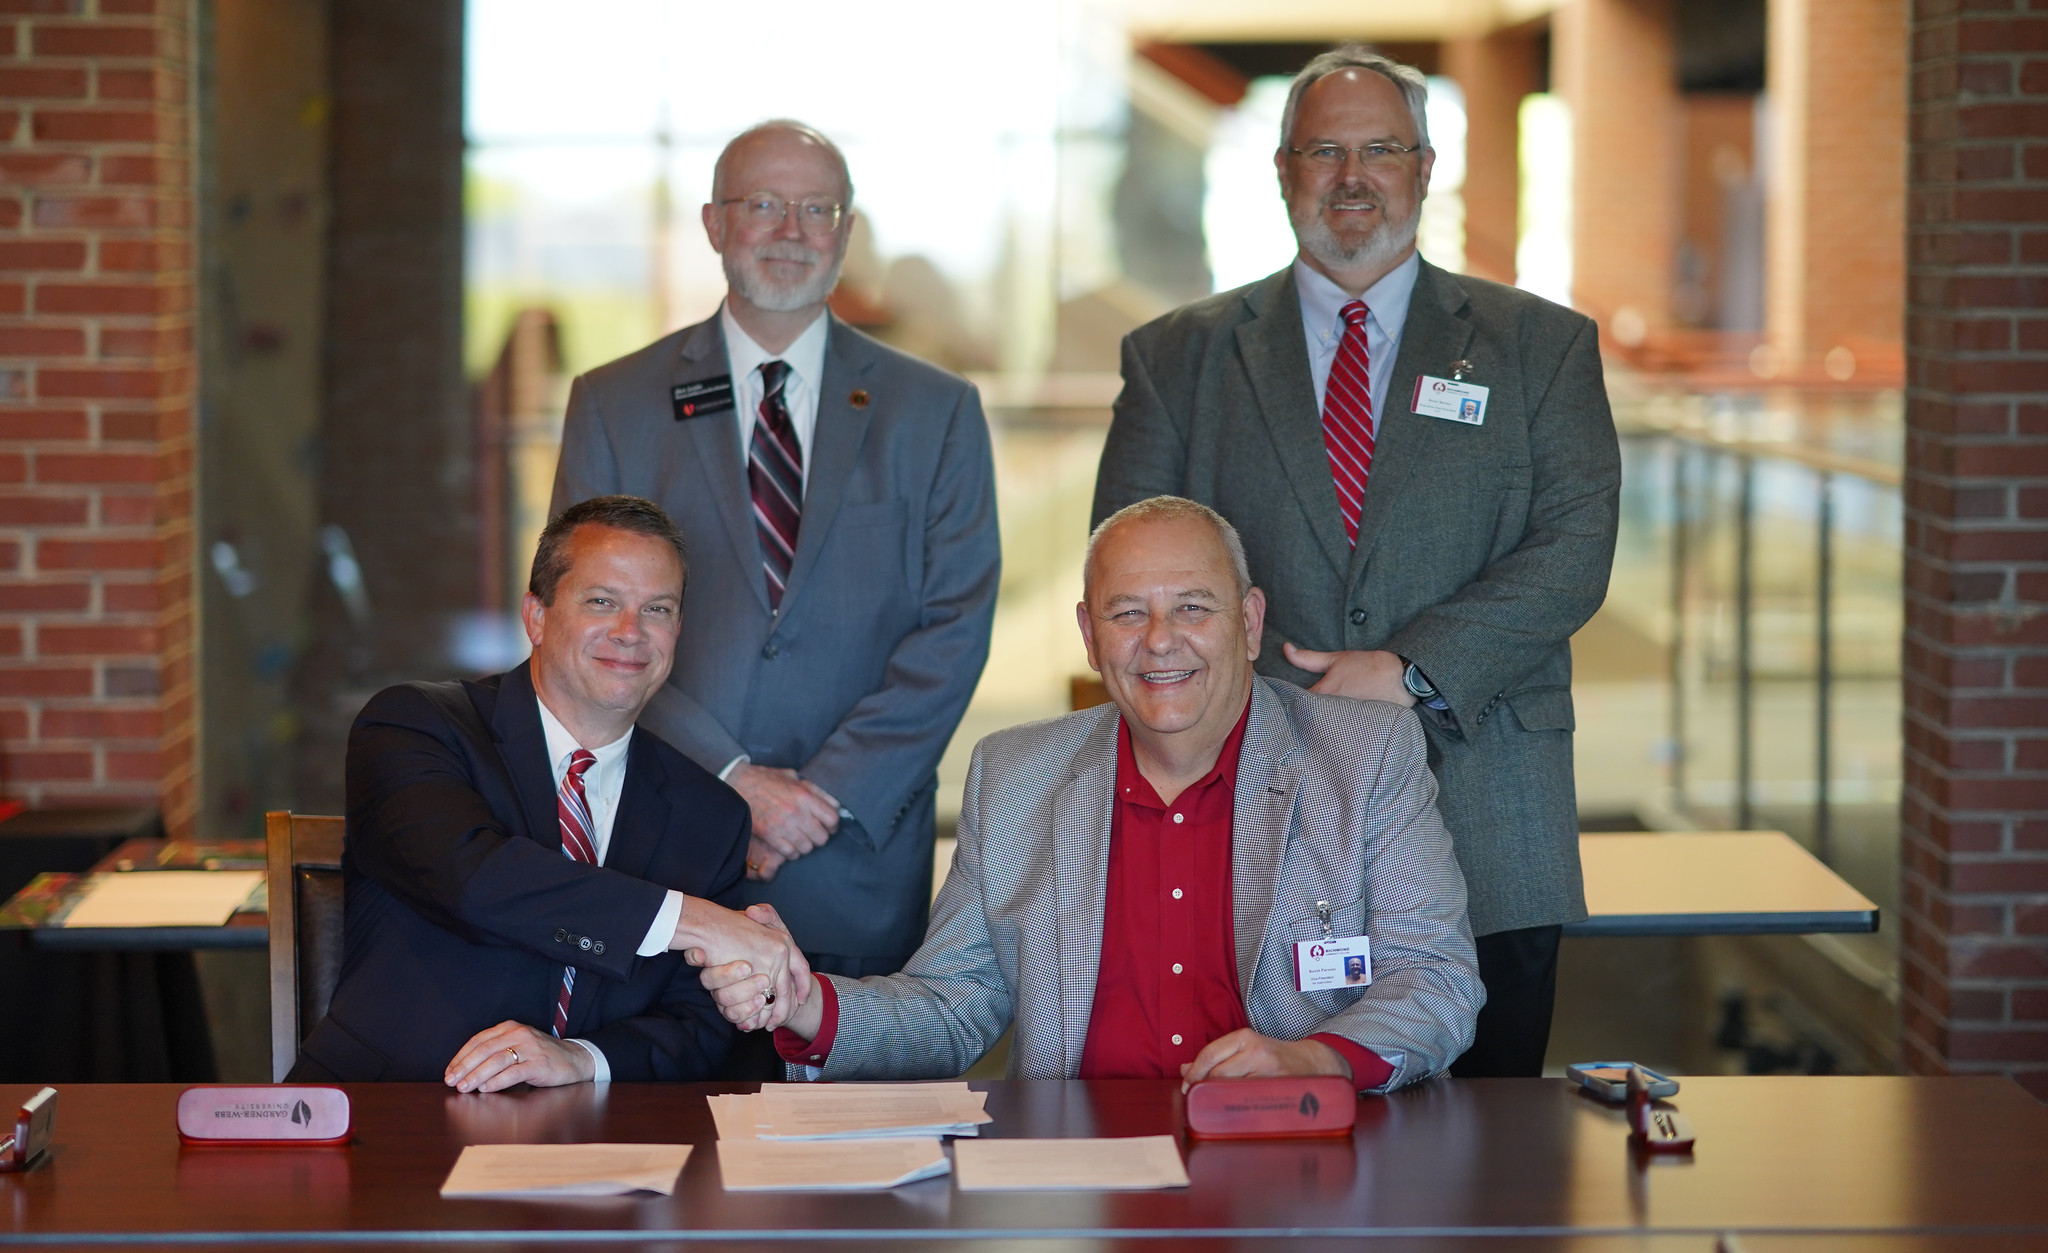 College leaders sit at table and sign articulation agreement